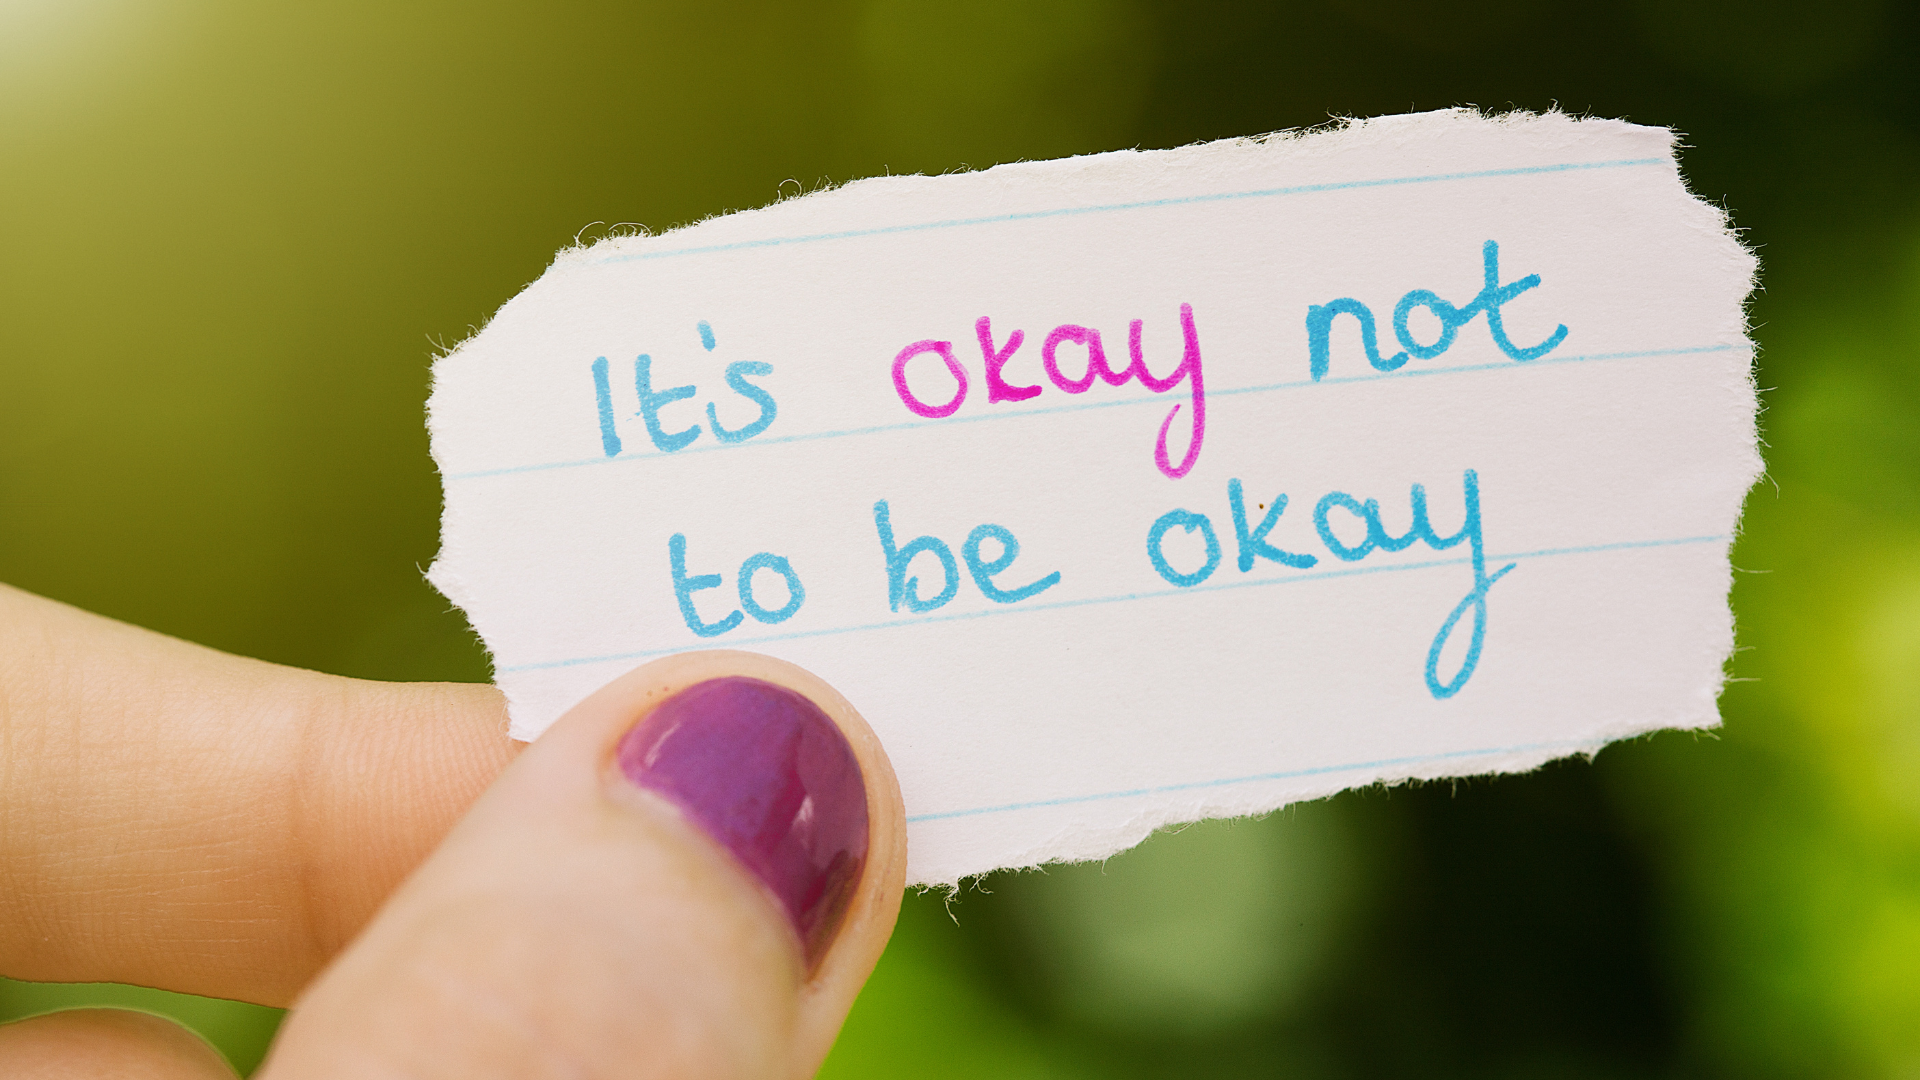 A piece of paper is held by a hand with purple nails that reads "It's okay no to be okay."